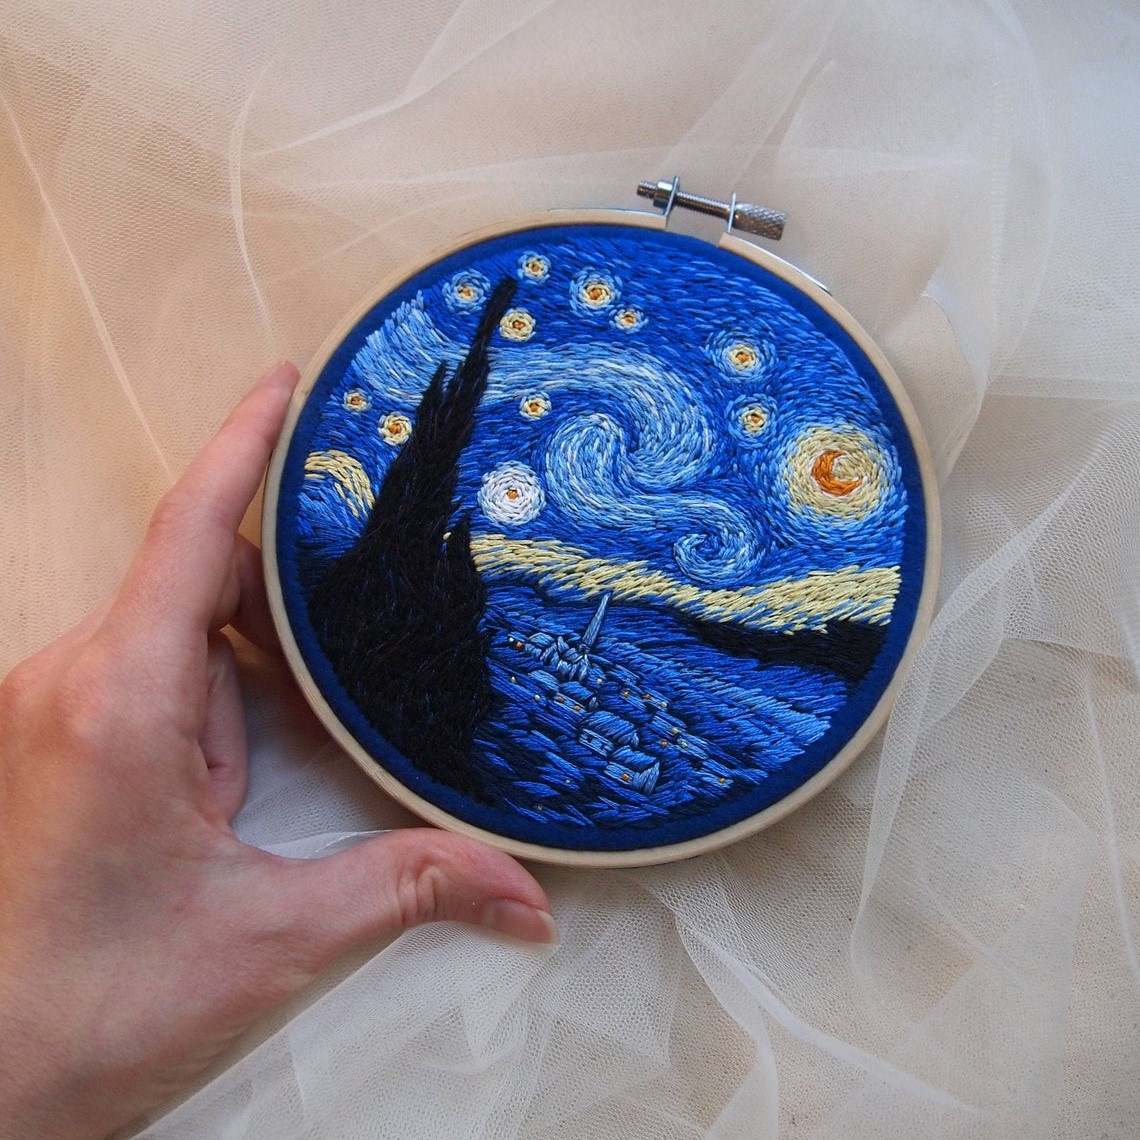 Minutely Embroidered Great Painters Masterpieces By Ira Kutsyna 10